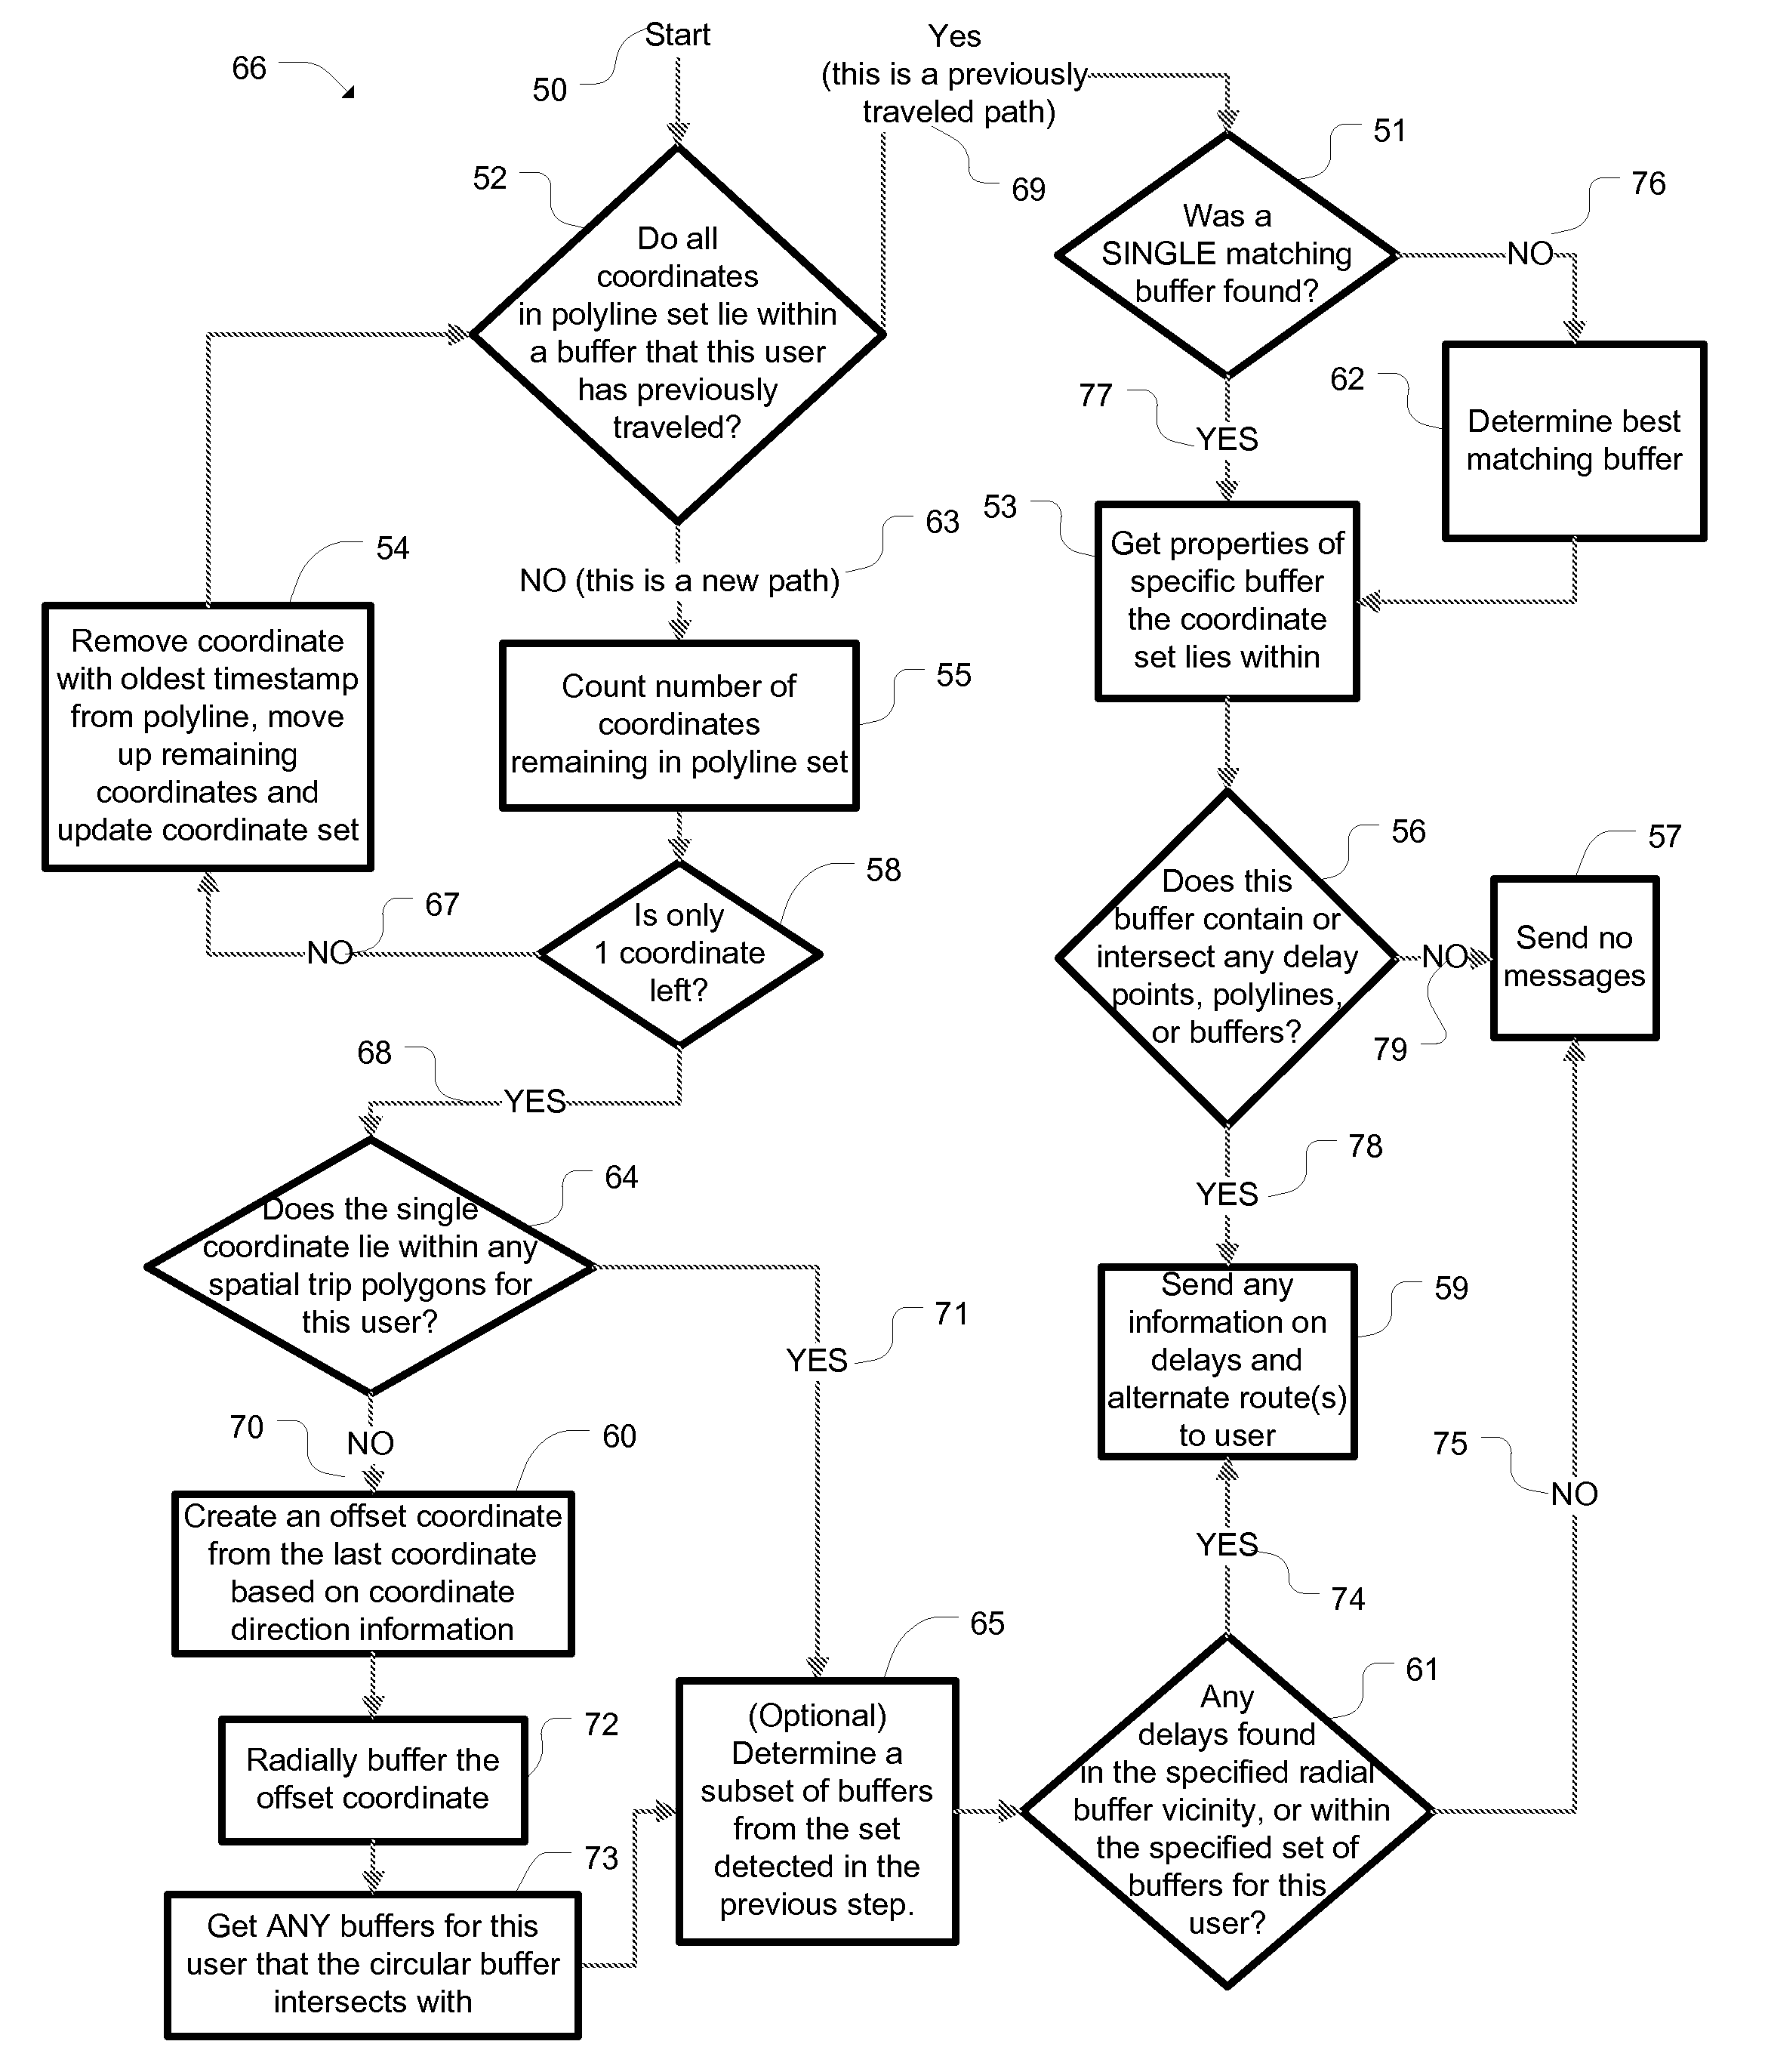 System and Method for Real-Time Travel Path Prediction and Automatic Incident Alerts